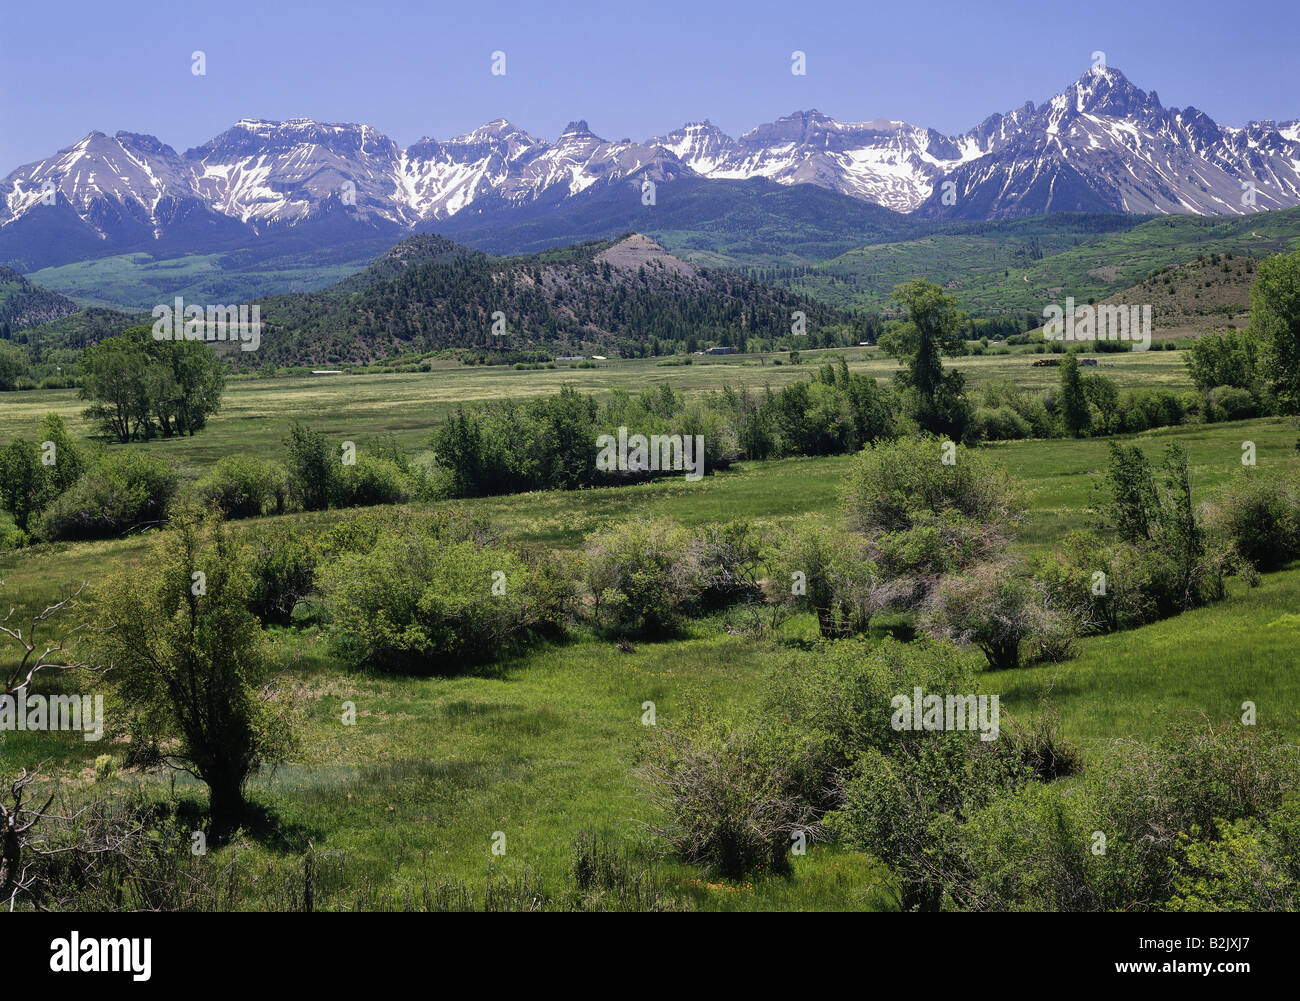 Geographie/Reisen, USA, Colorado, Landschaften, San Juan Berge, Additional-Rights - Clearance-Info - Not-Available Stockfoto